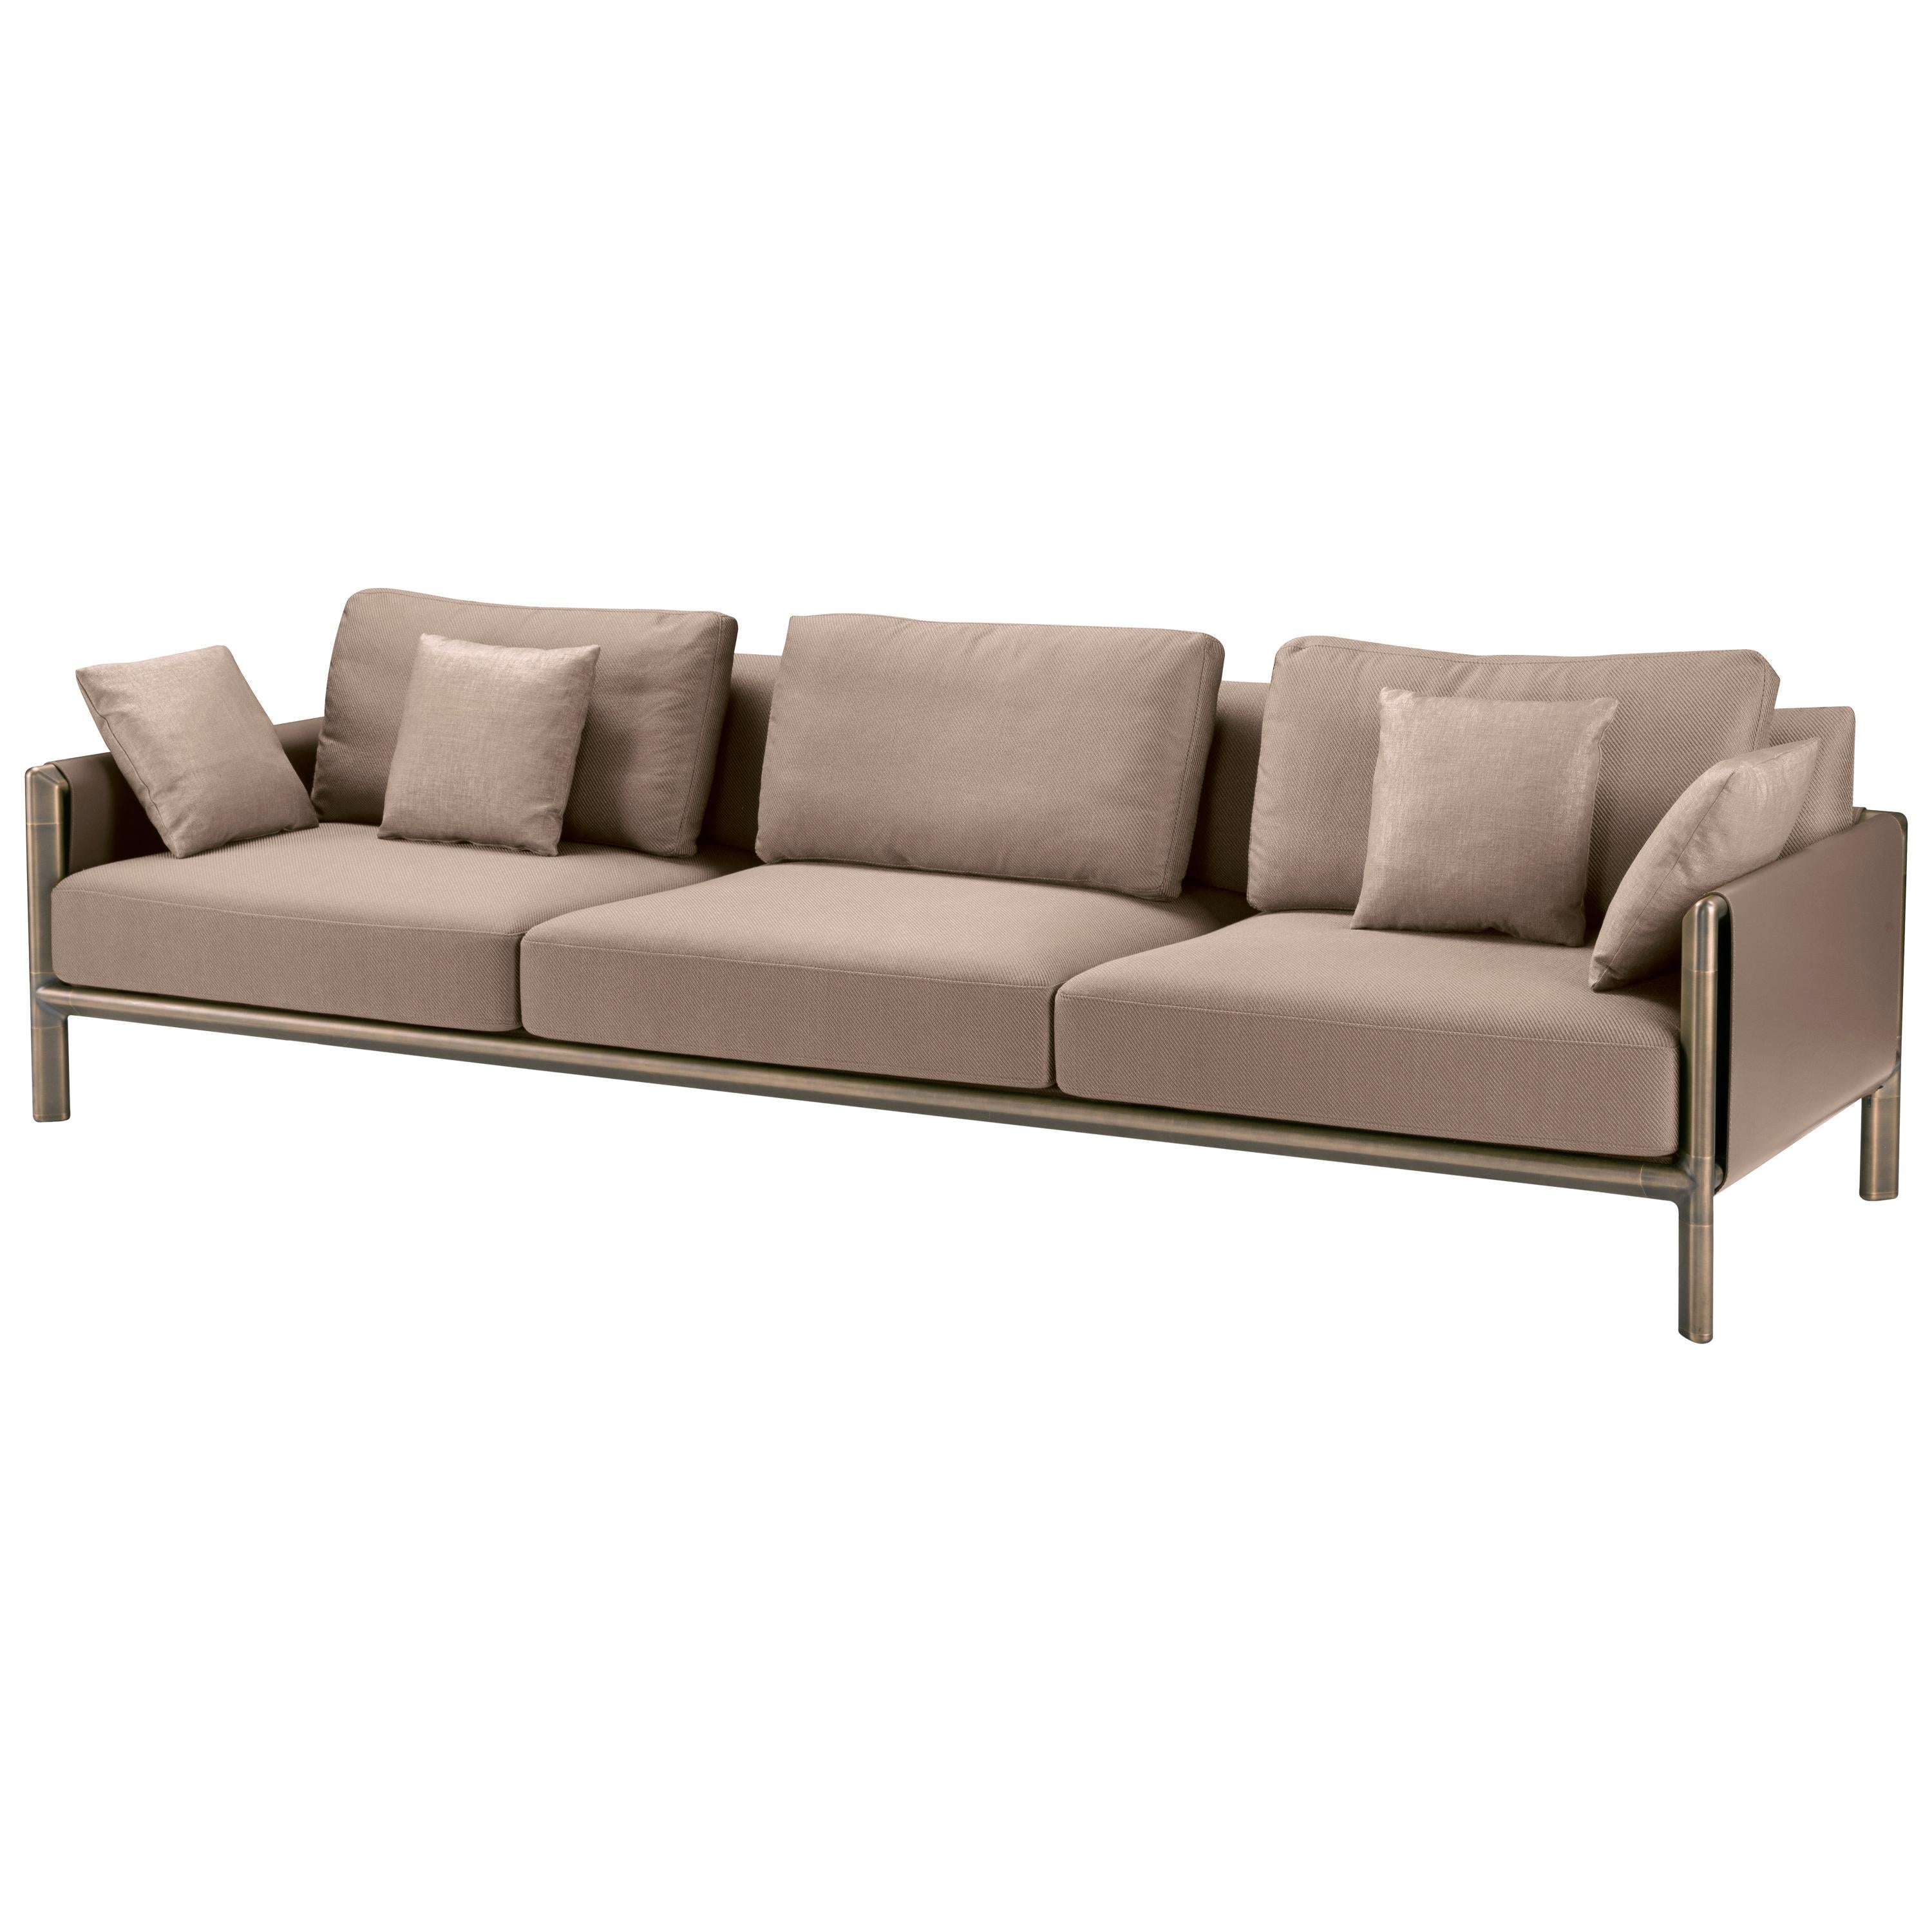 Ghidini 1961 Frame 3-Seat Sofa with Arms in Cuoio Leather by Stefano Giovannoni 